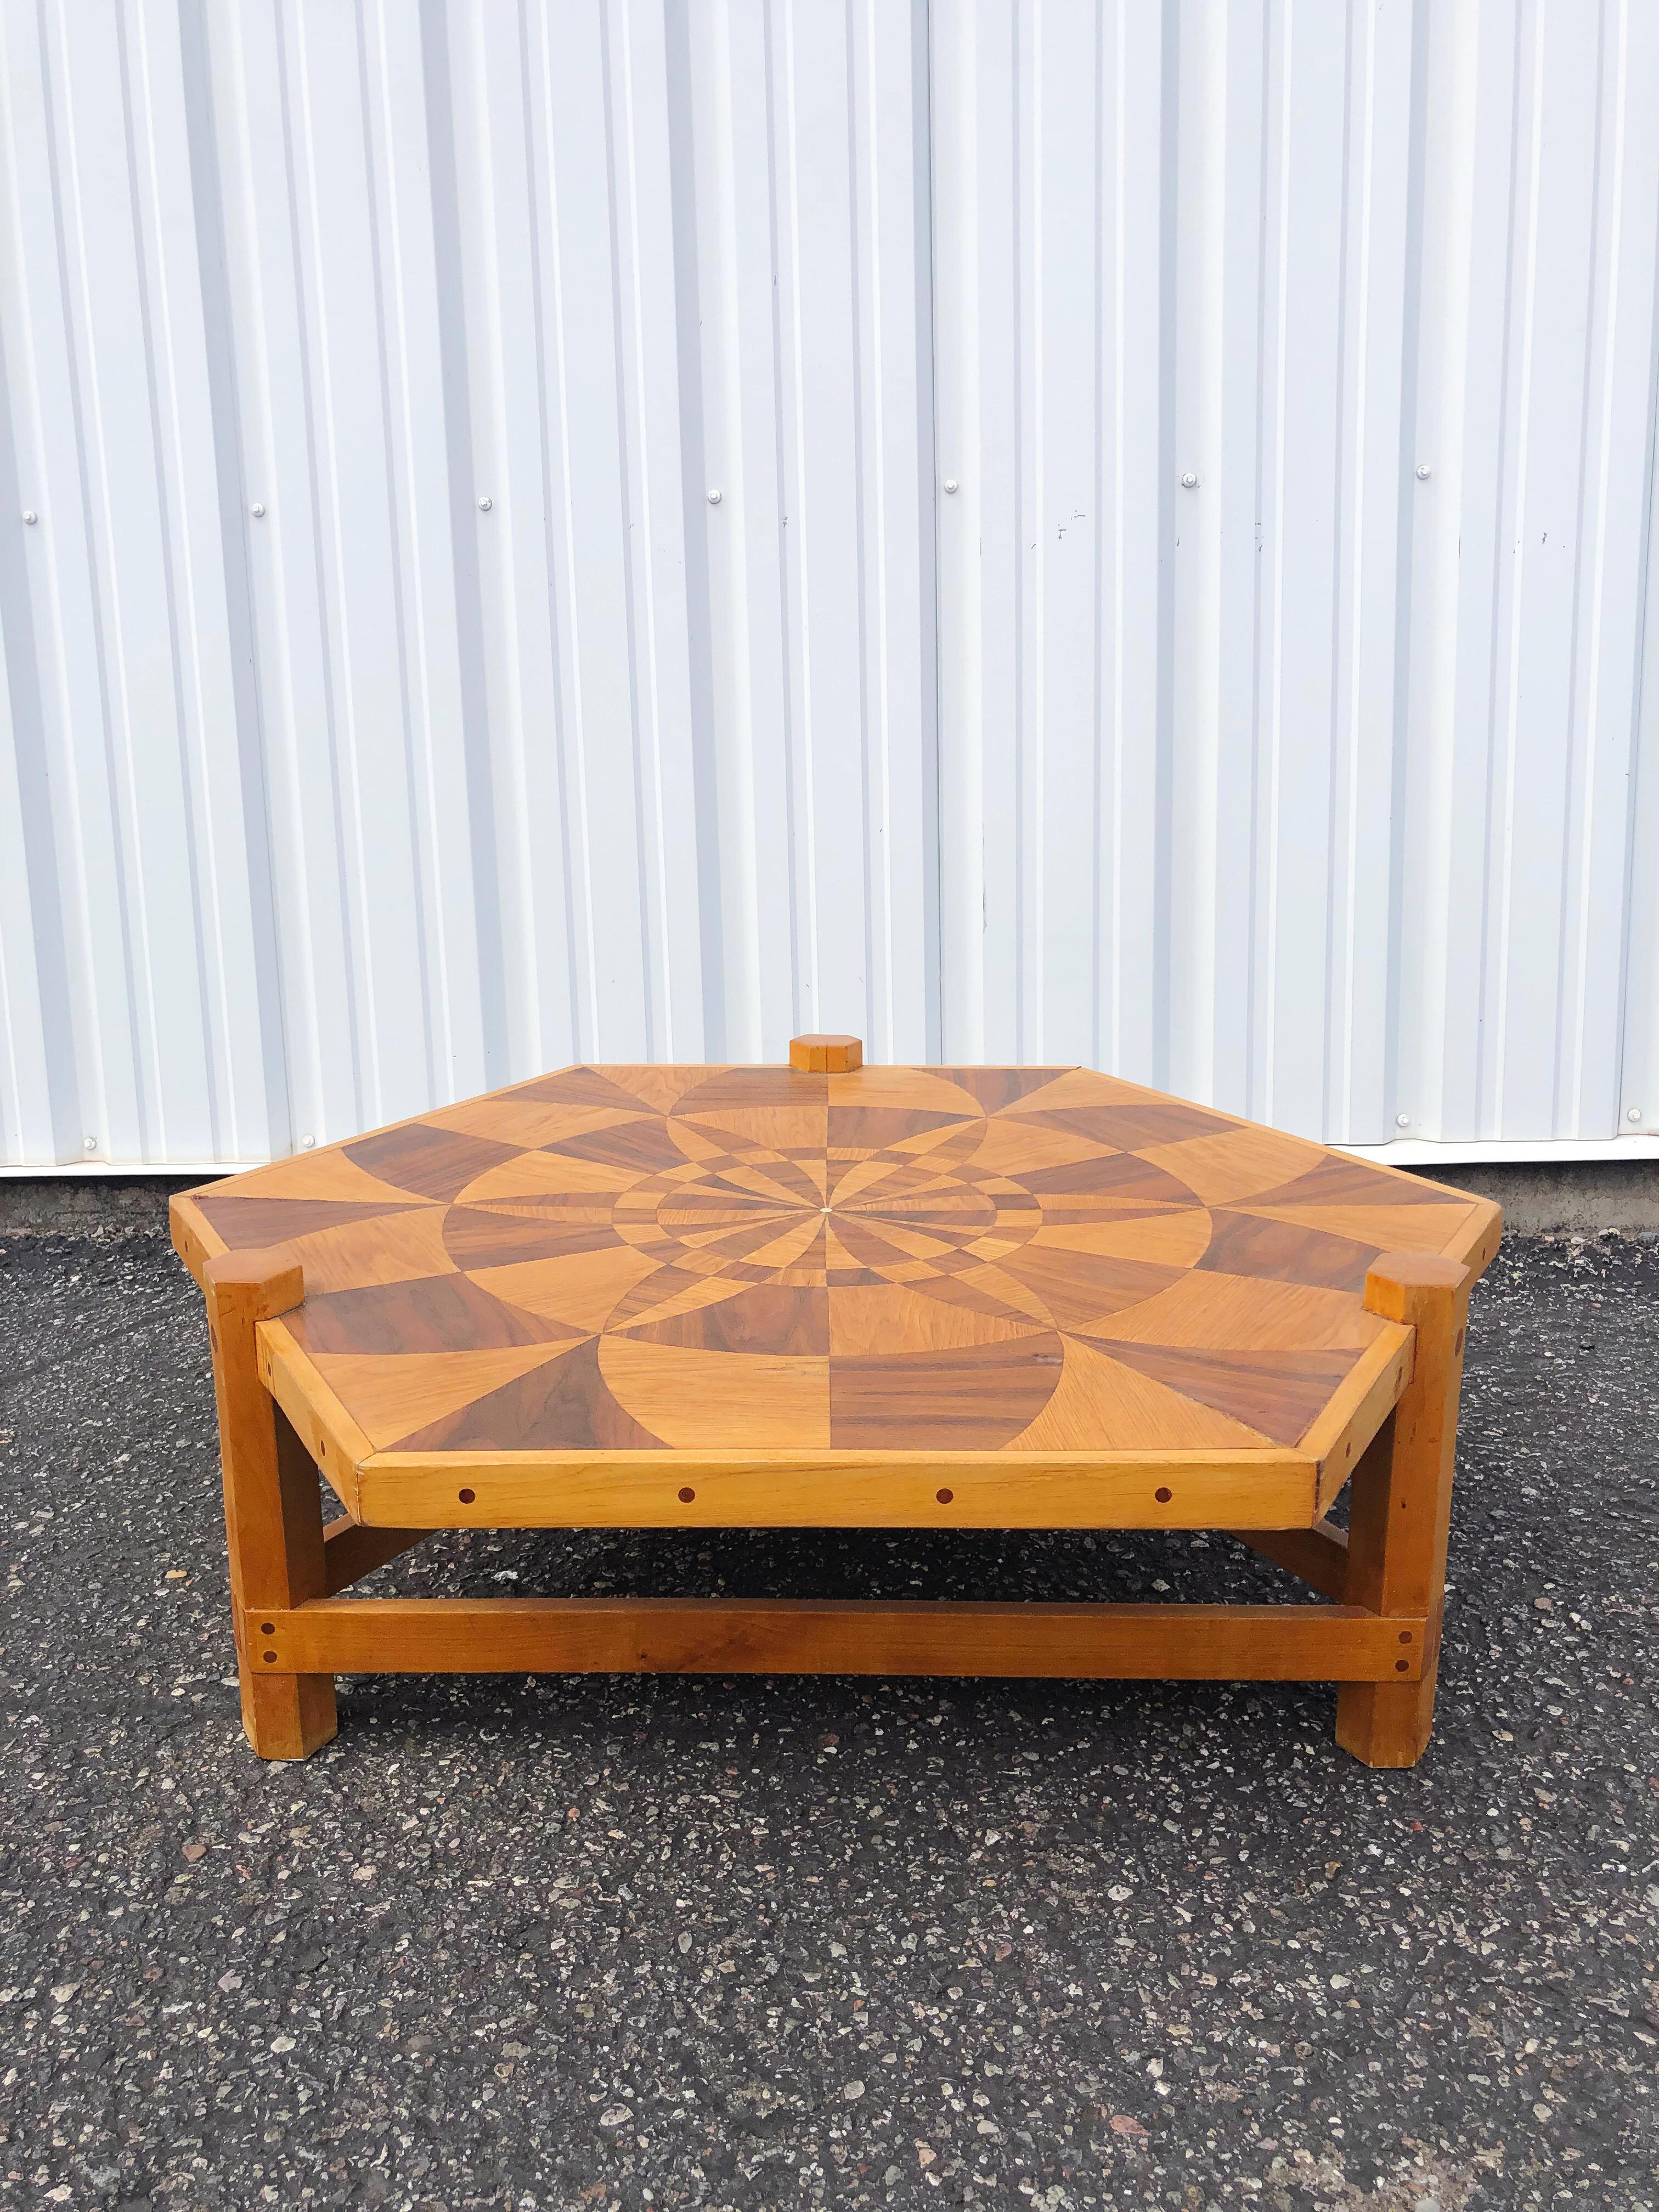 Modernist Marquetry Folk Art Wooden Inlay Coffee Table with Geometric Design For Sale 3